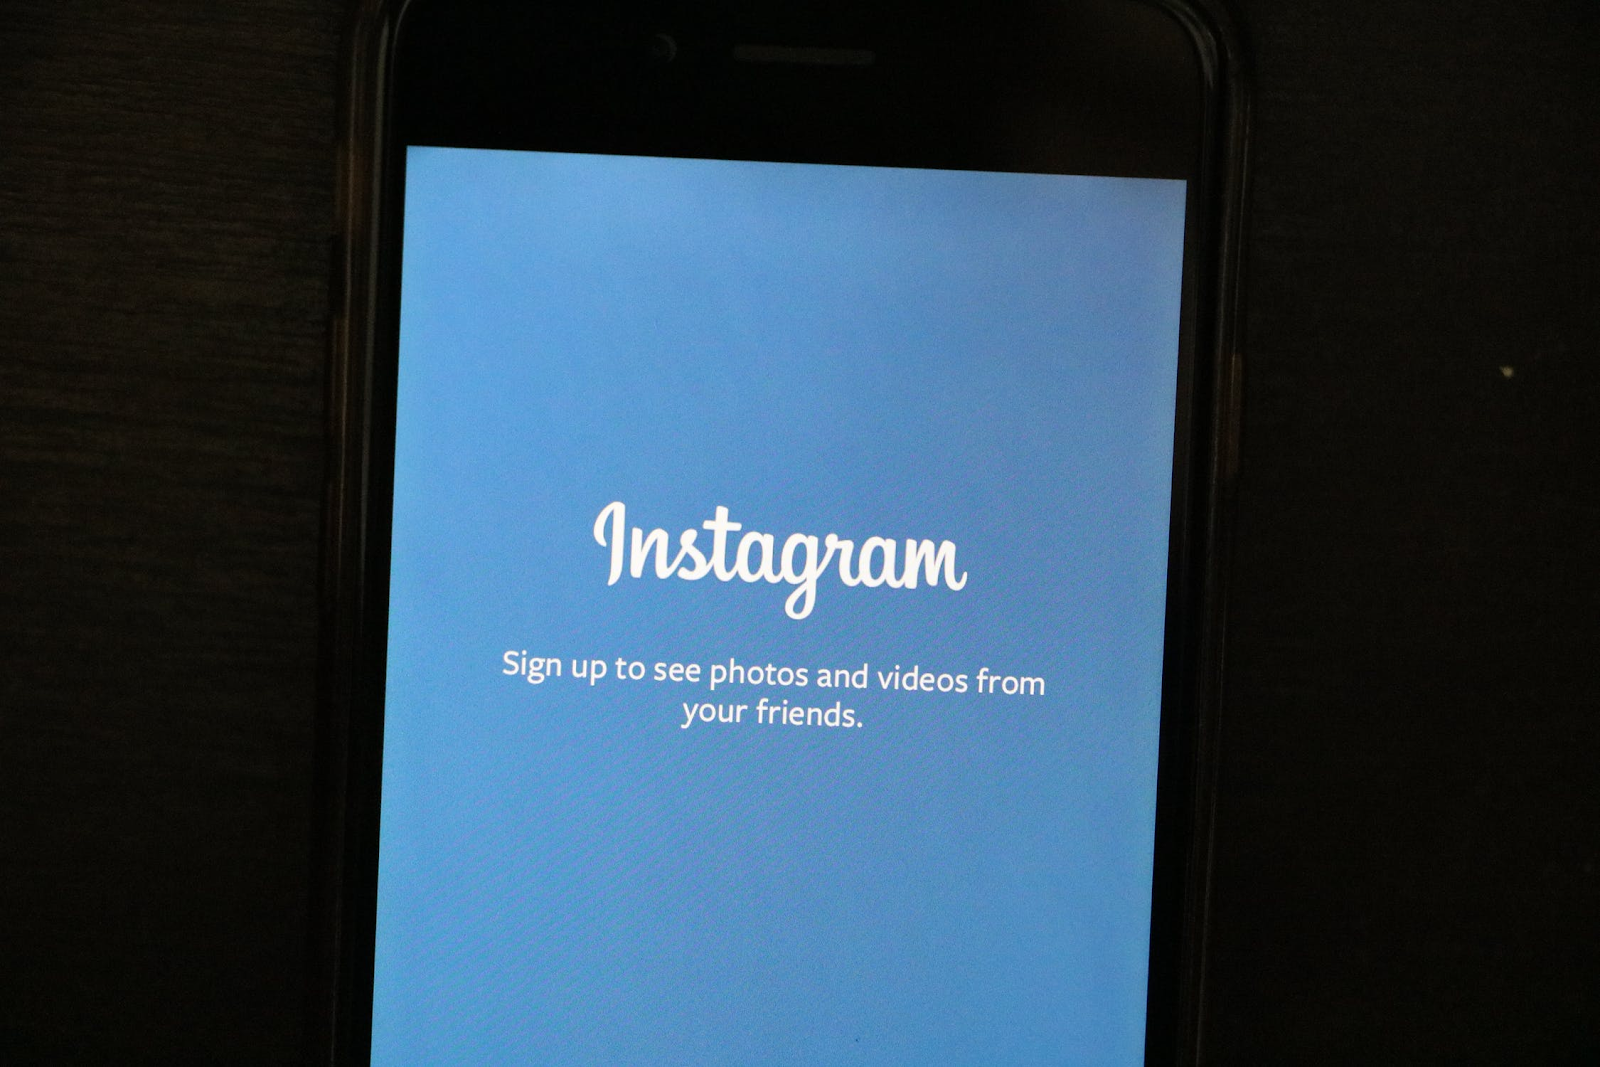 A mobile phone displays Instagram’s home page